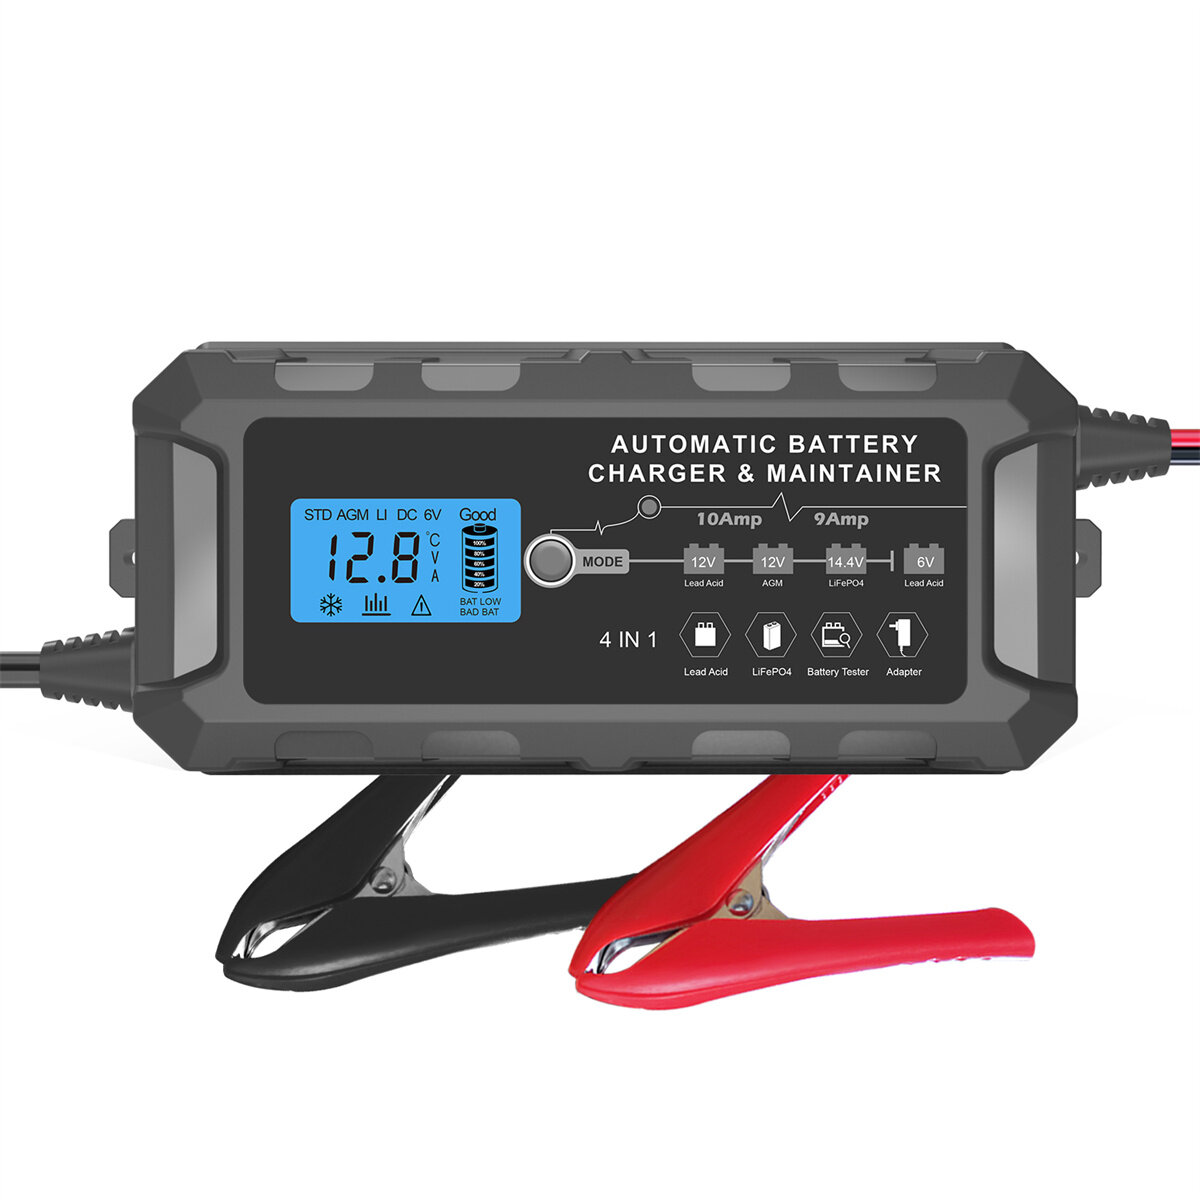 Andeman 12V 10A/14V 9A Battery Charger for Motorcycle Car Battery Repair AGM GEL Lithium LiFePo4